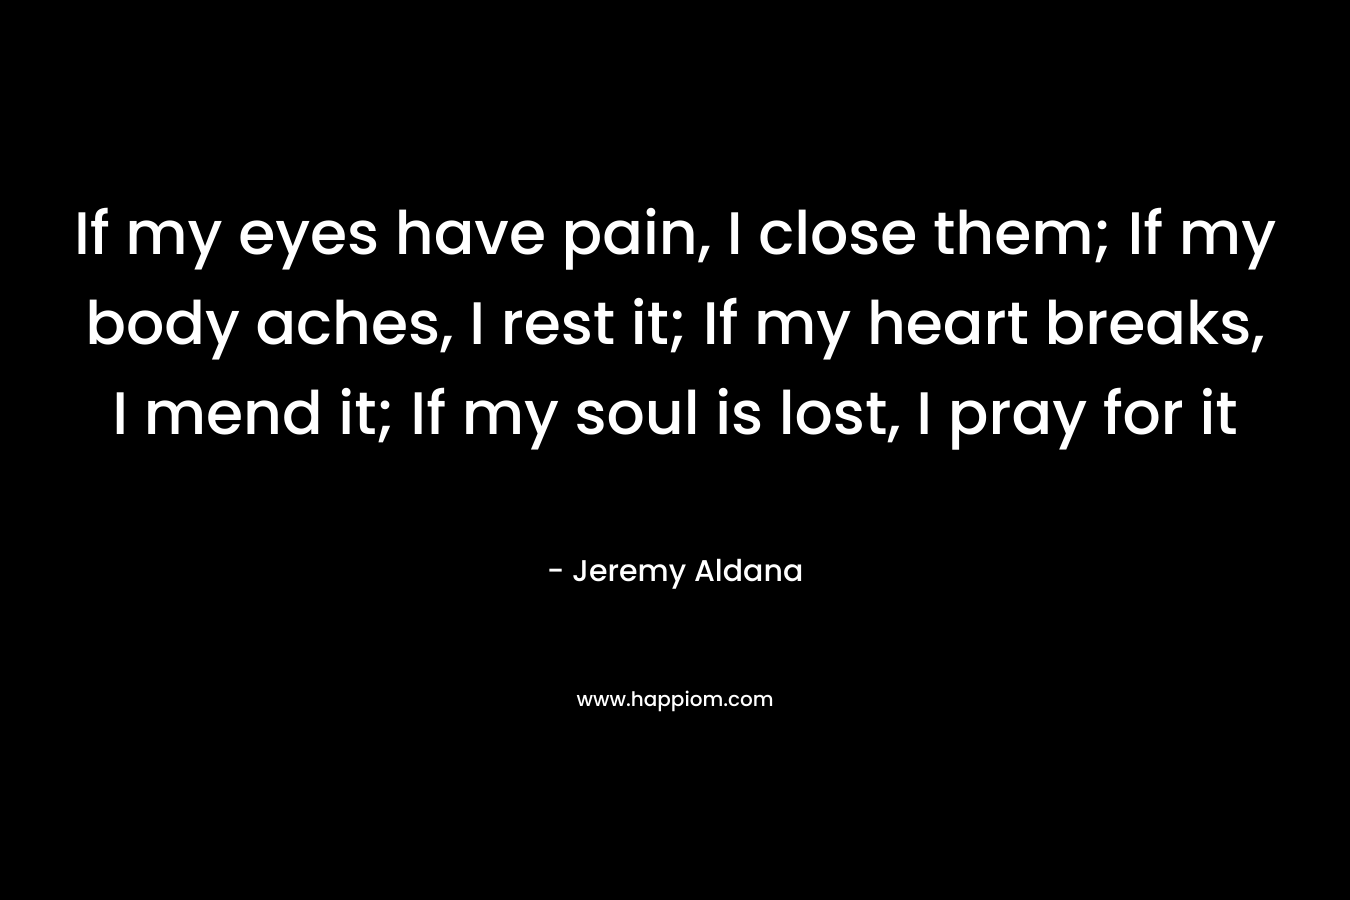 If my eyes have pain, I close them; If my body aches, I rest it; If my heart breaks, I mend it; If my soul is lost, I pray for it